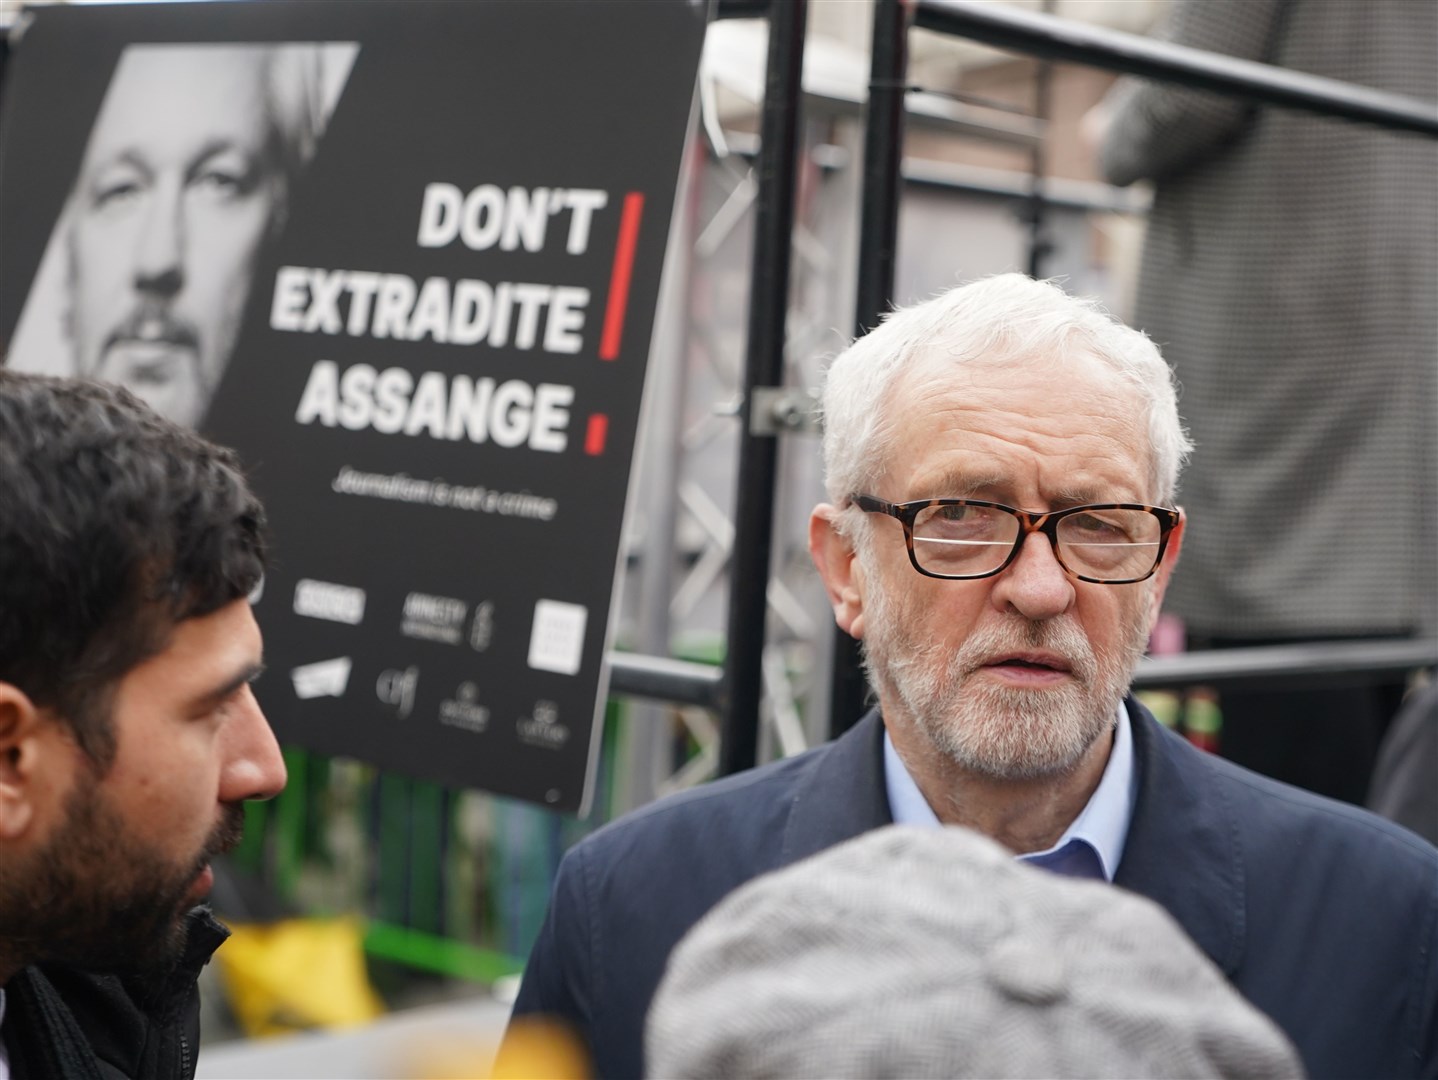 Former Labour leader Jeremy Corbyn arrives at the Royal Courts of Justice in London ahead of a two-day hearing in the extradition case of WikiLeaks founder Julian Assange (Yui Mok/PA)